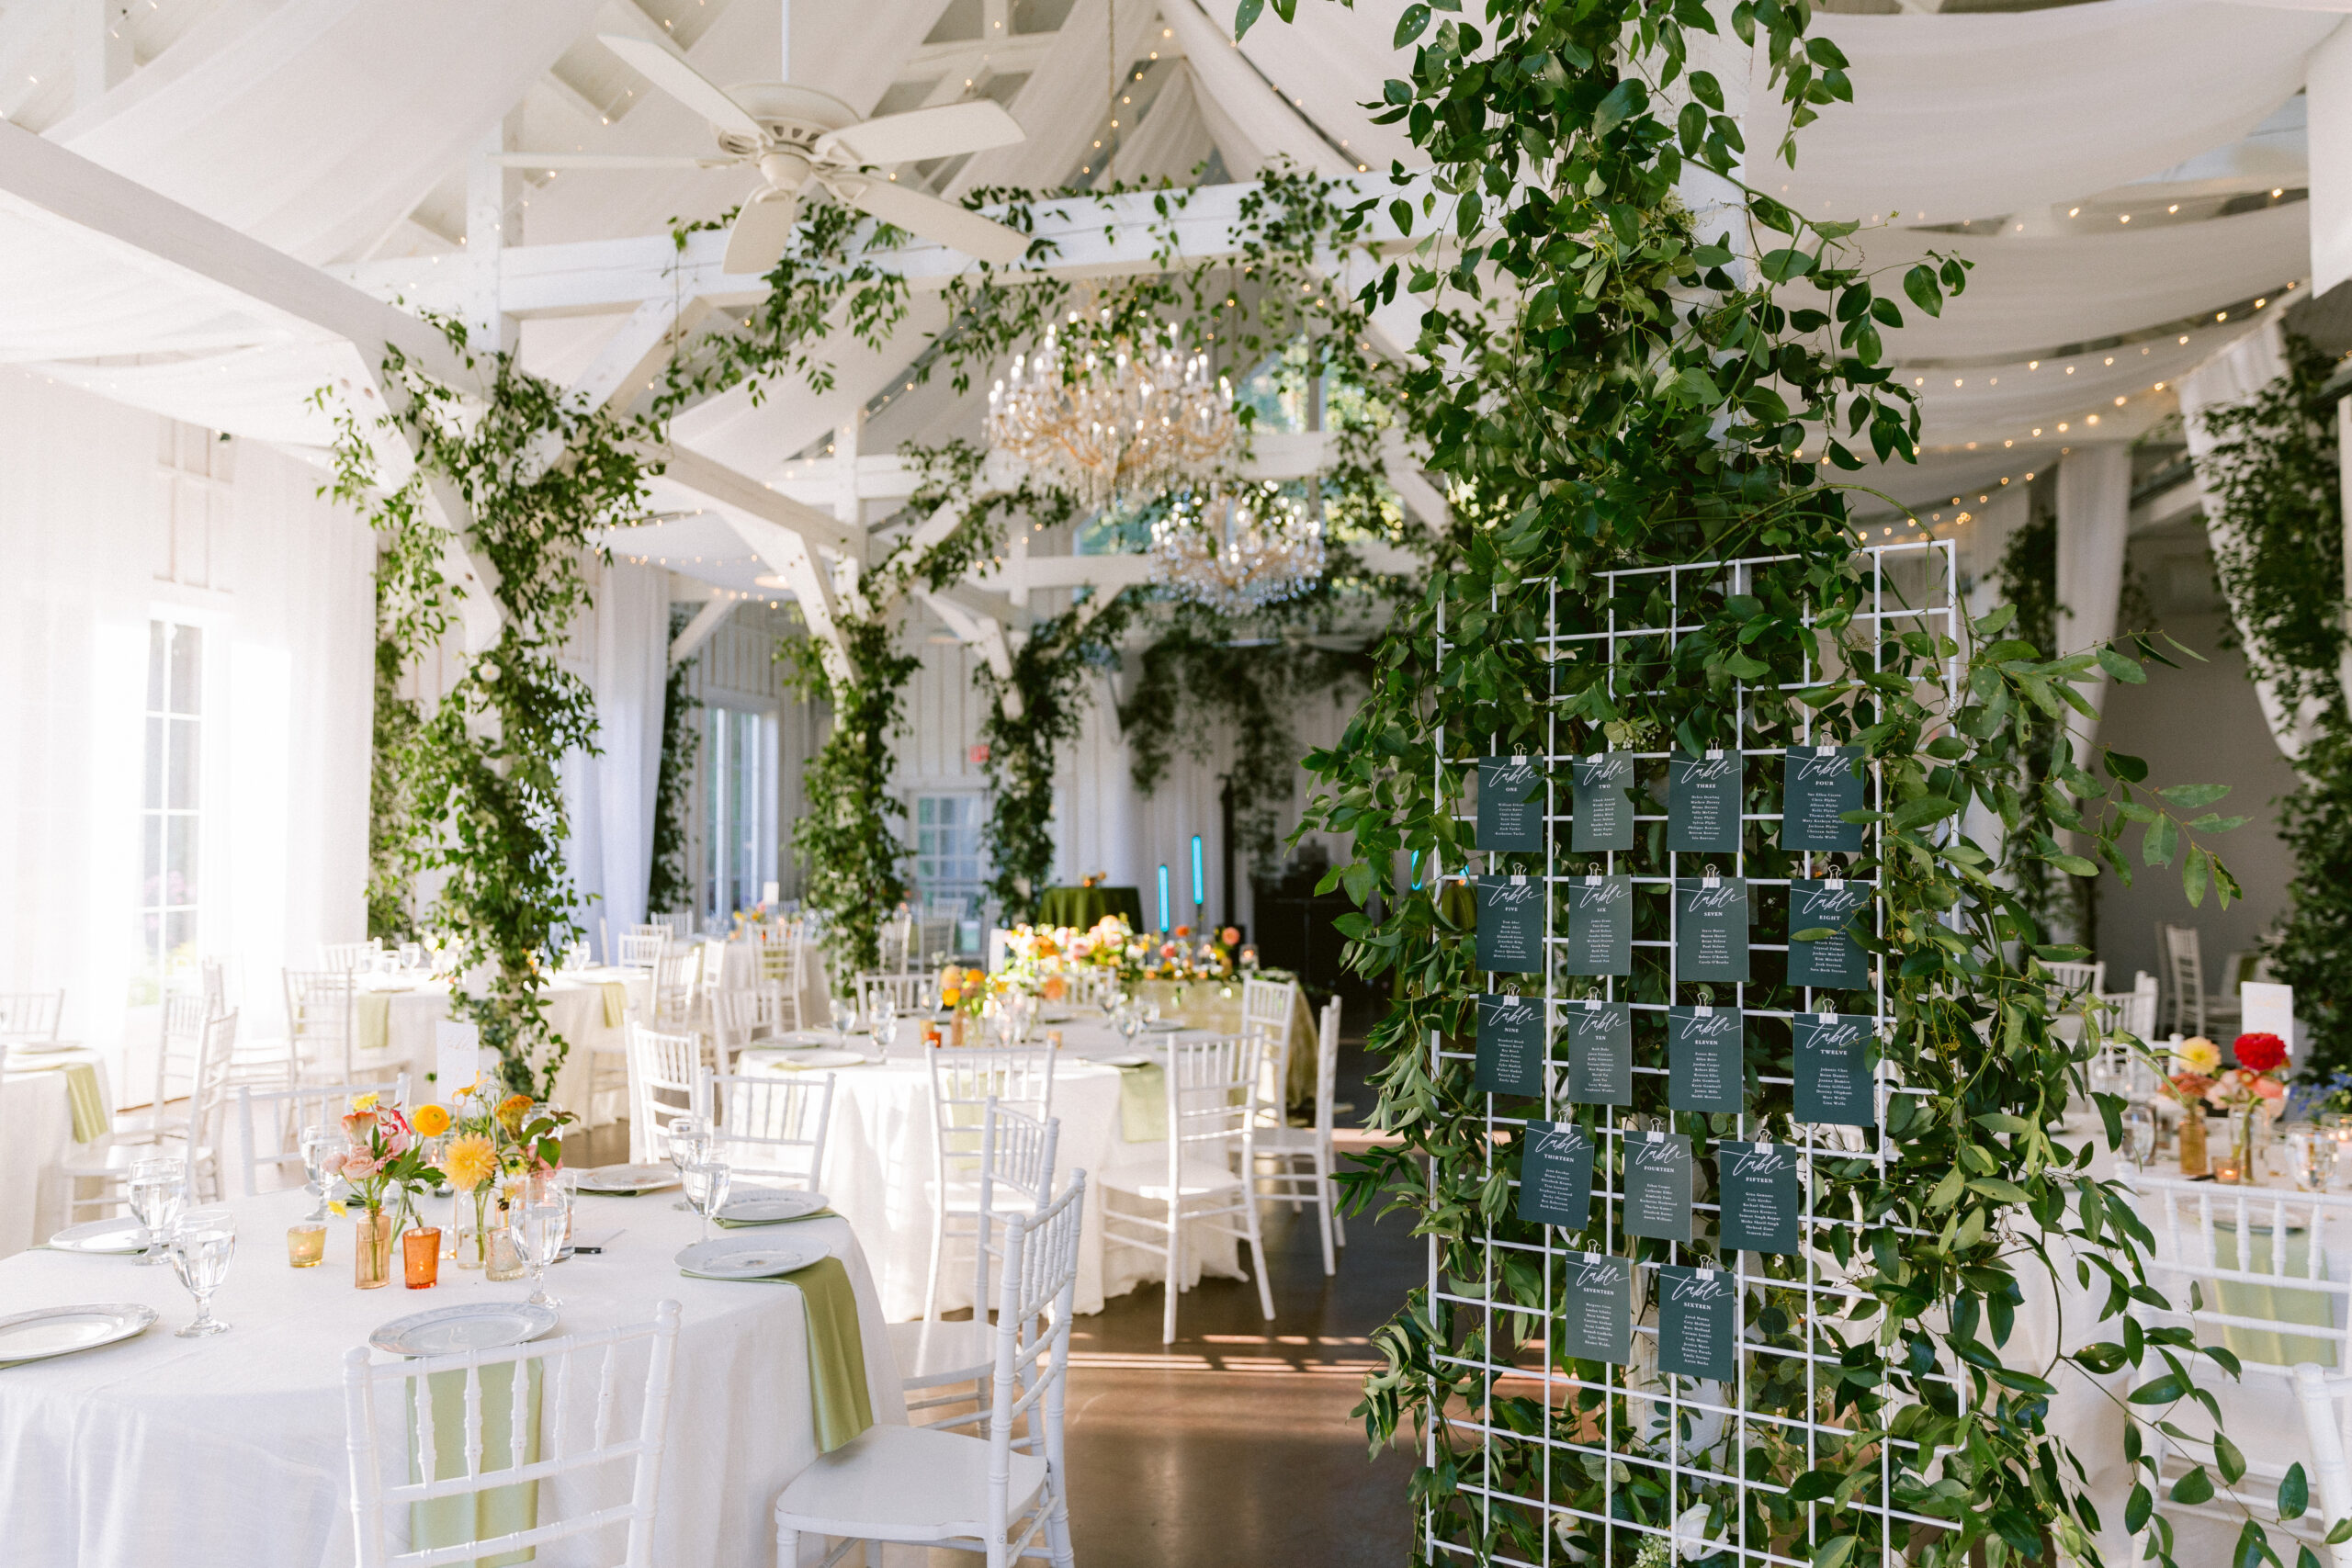 Aurora Farms wedding venue laden in vibrant florals and greenery.